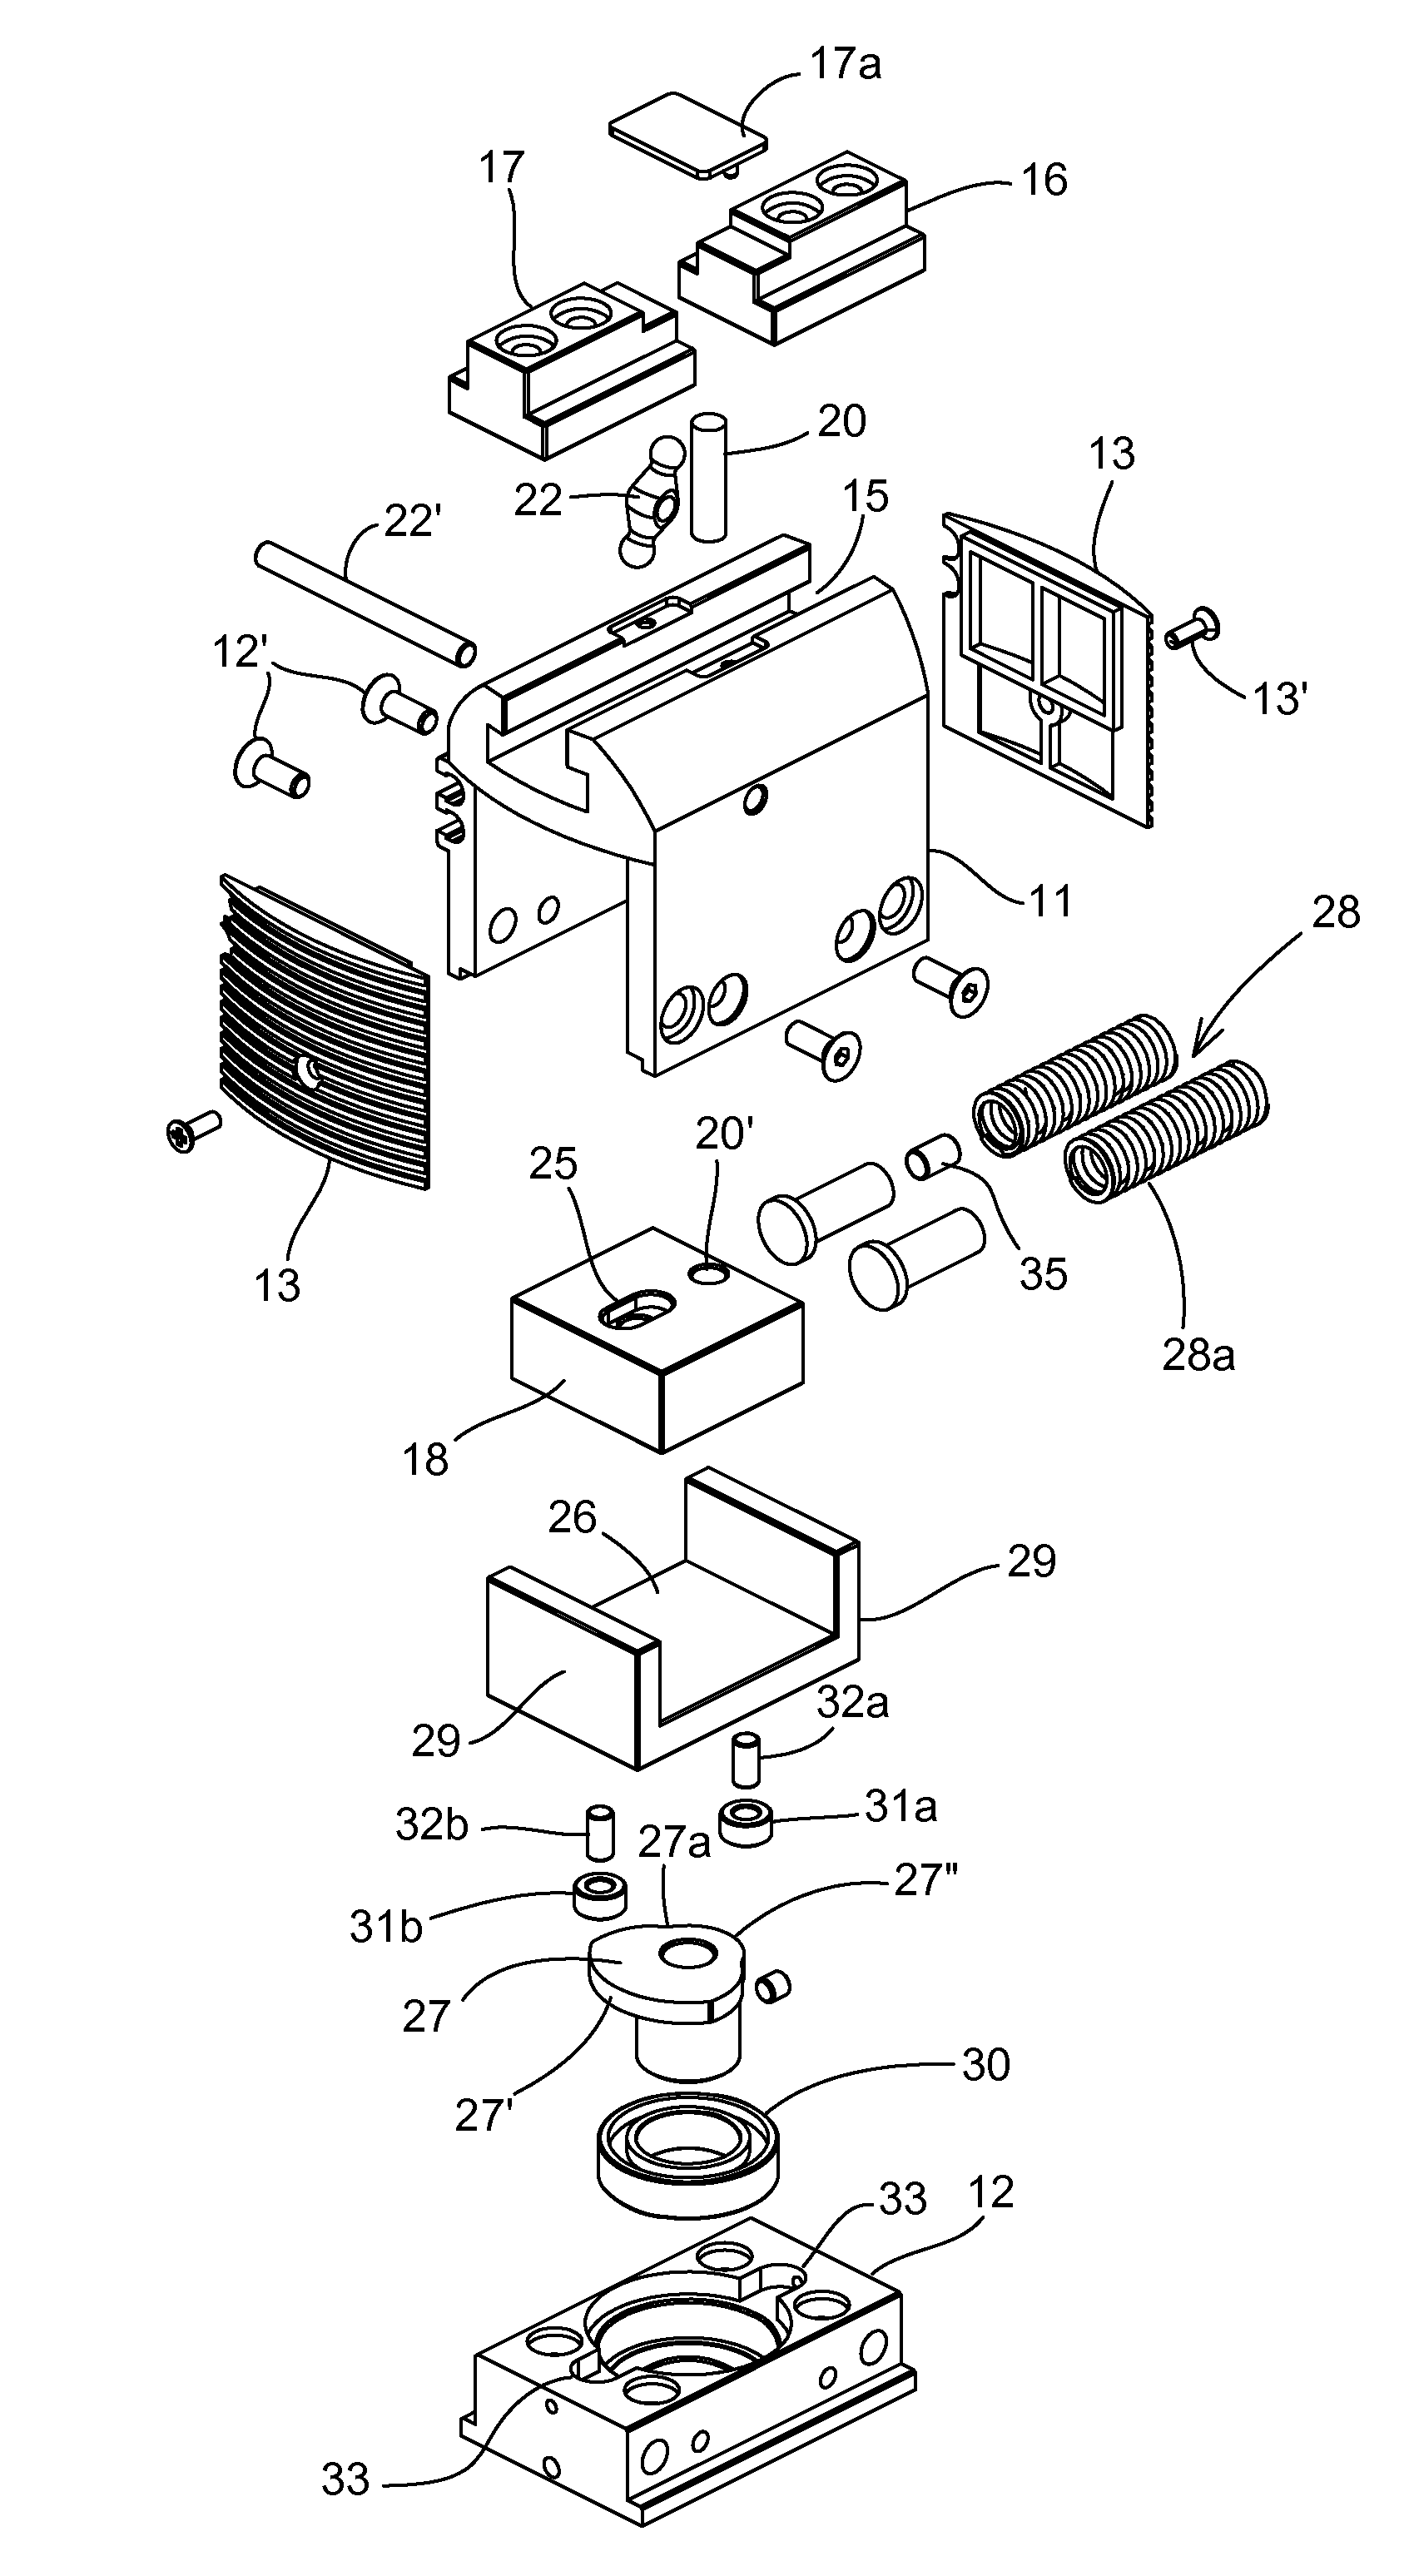 Device for operating a gripping or movement tool starting from an electric actuator